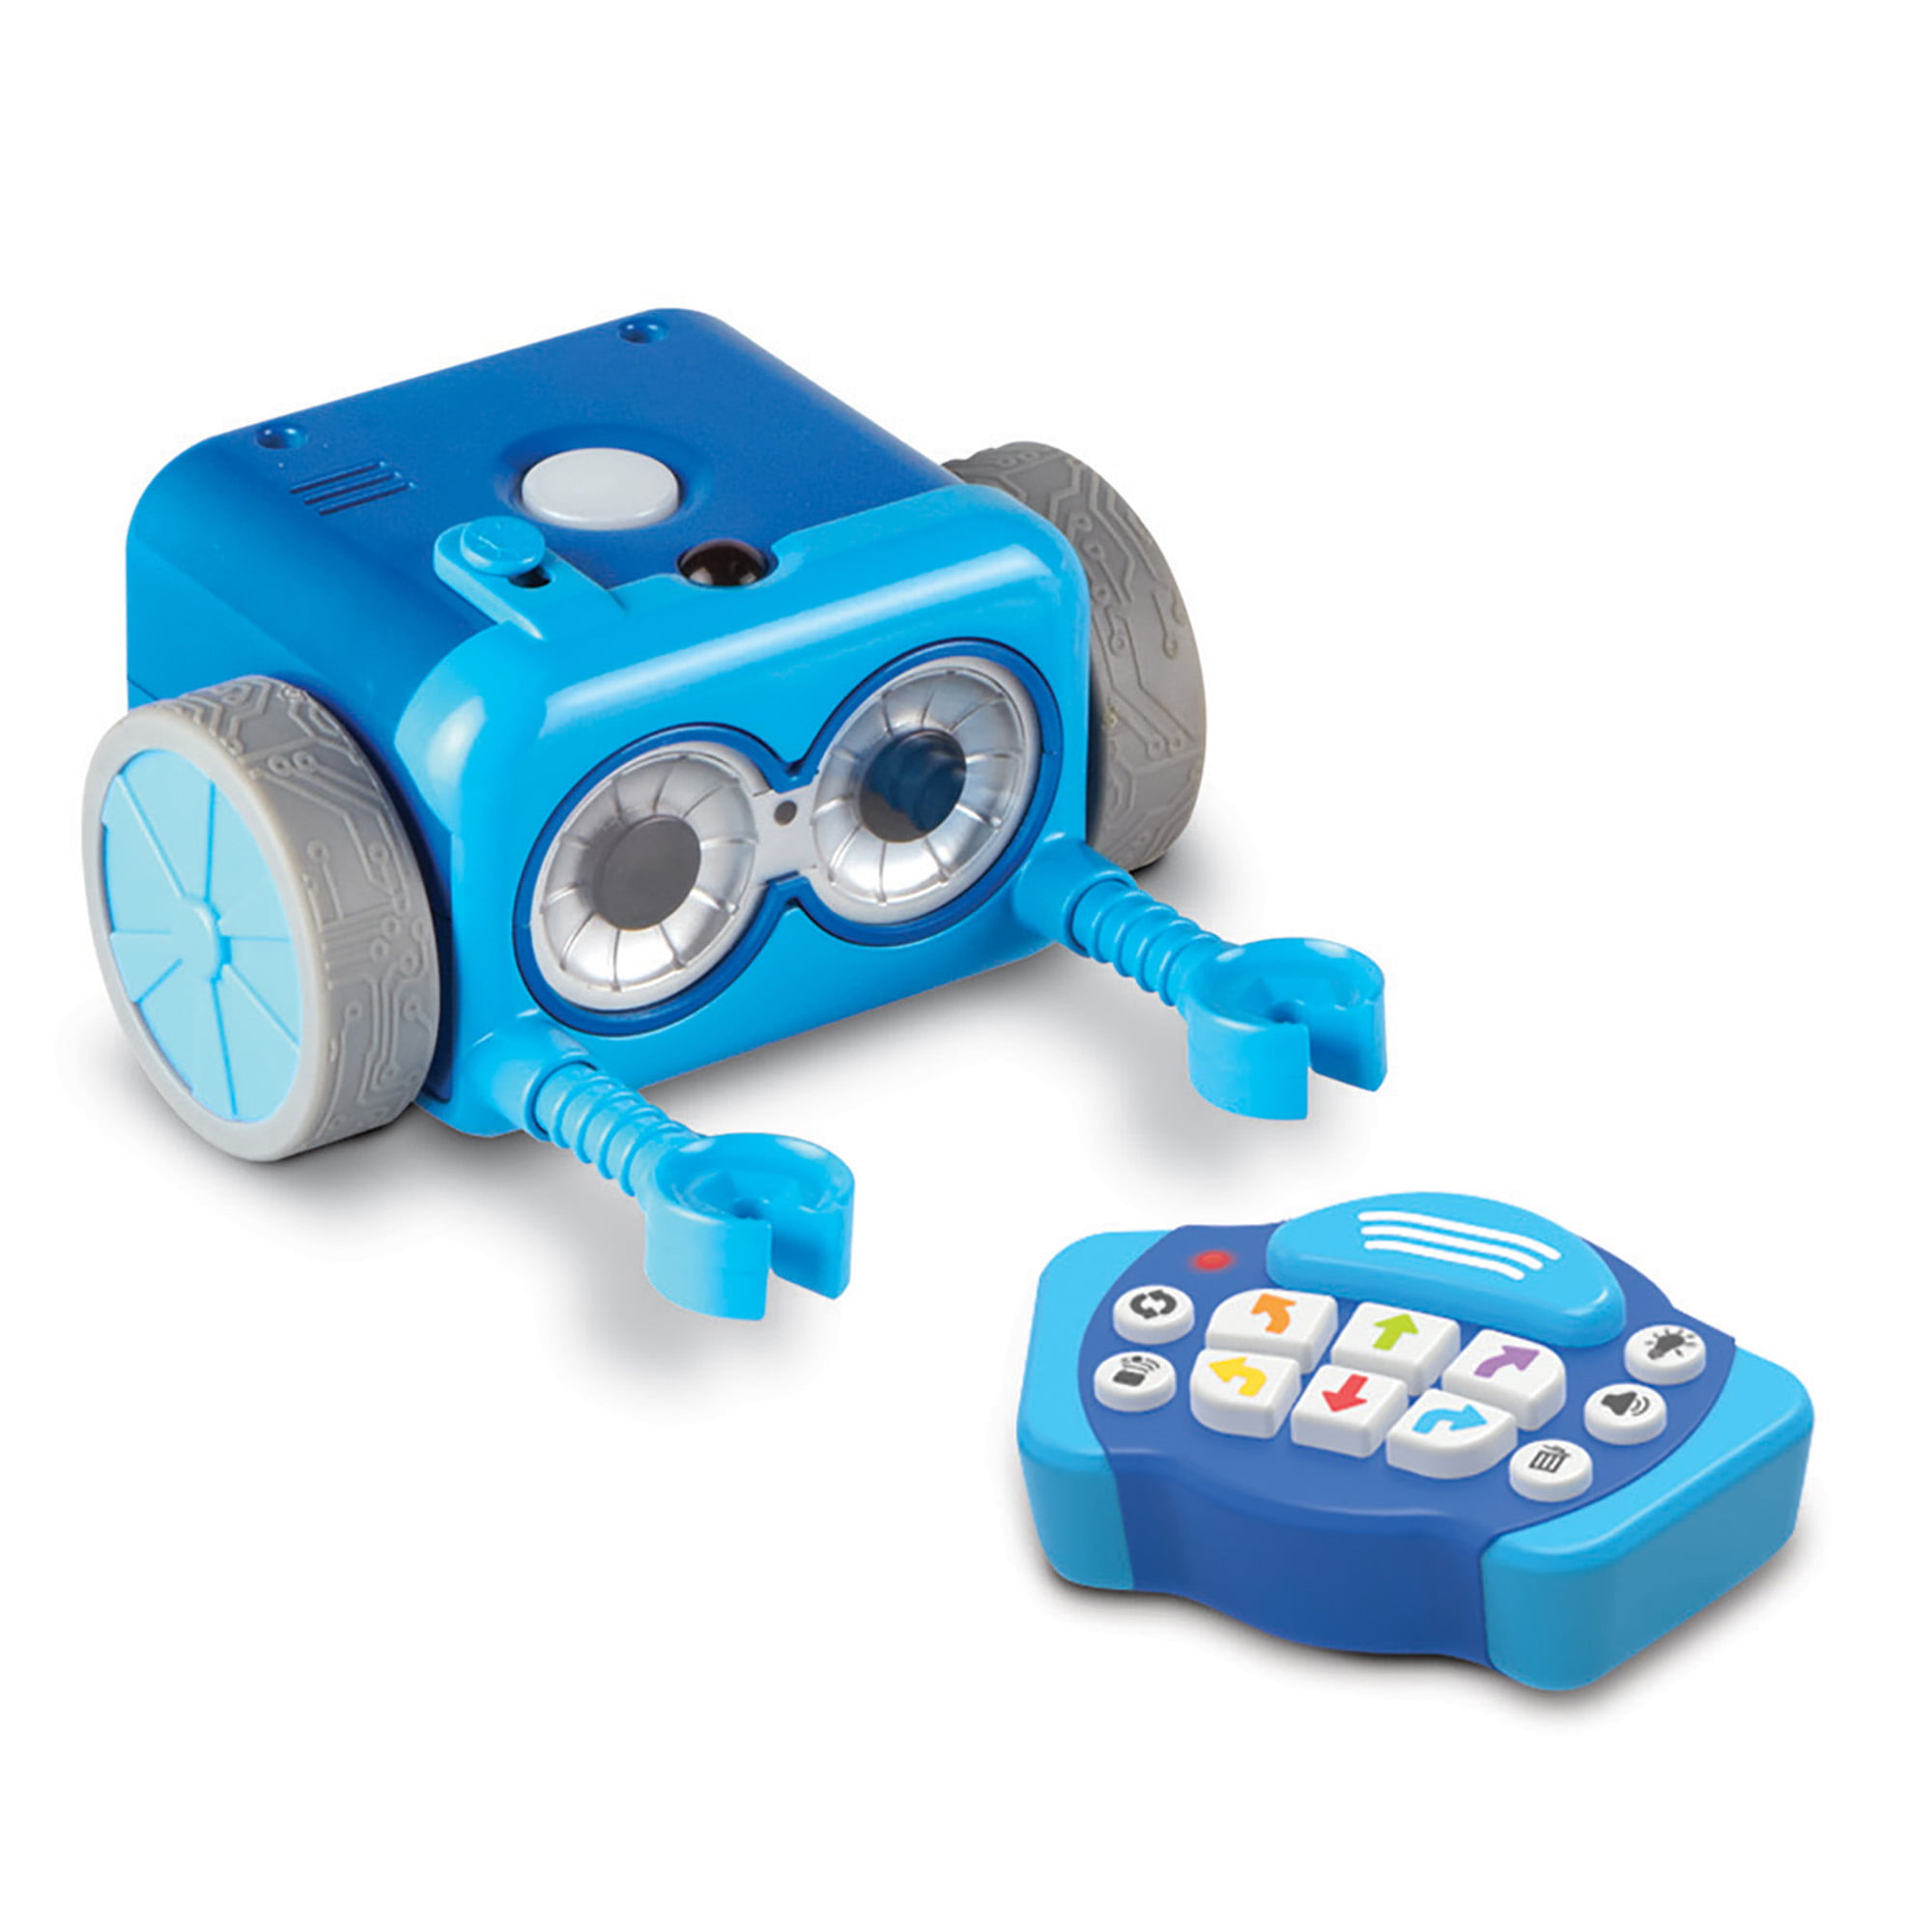  Learning Resources Botley The Coding Robot 2.0 Activity Set -  78 Pieces, Ages 5+, Coding Robot for Kids, STEM Toys for Kids, Early  Programming and Coding Games for Kids : Toys & Games